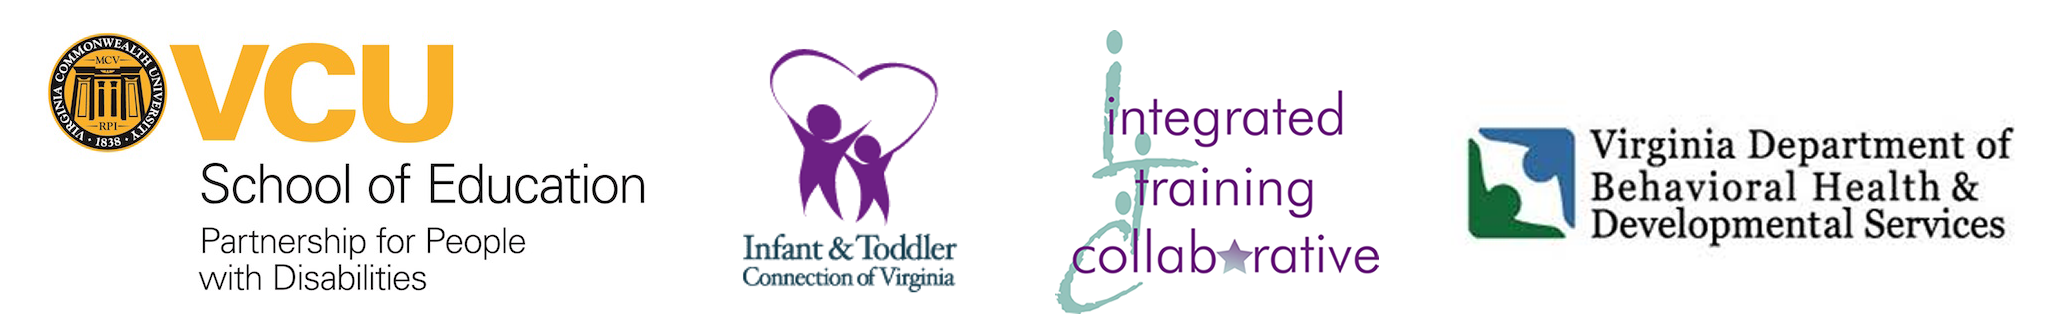 VCUE Logo, ITC Log, Infant Toddler Connection of Virginia Logo and Virginia Department of Behavioral Health and Developmental Services